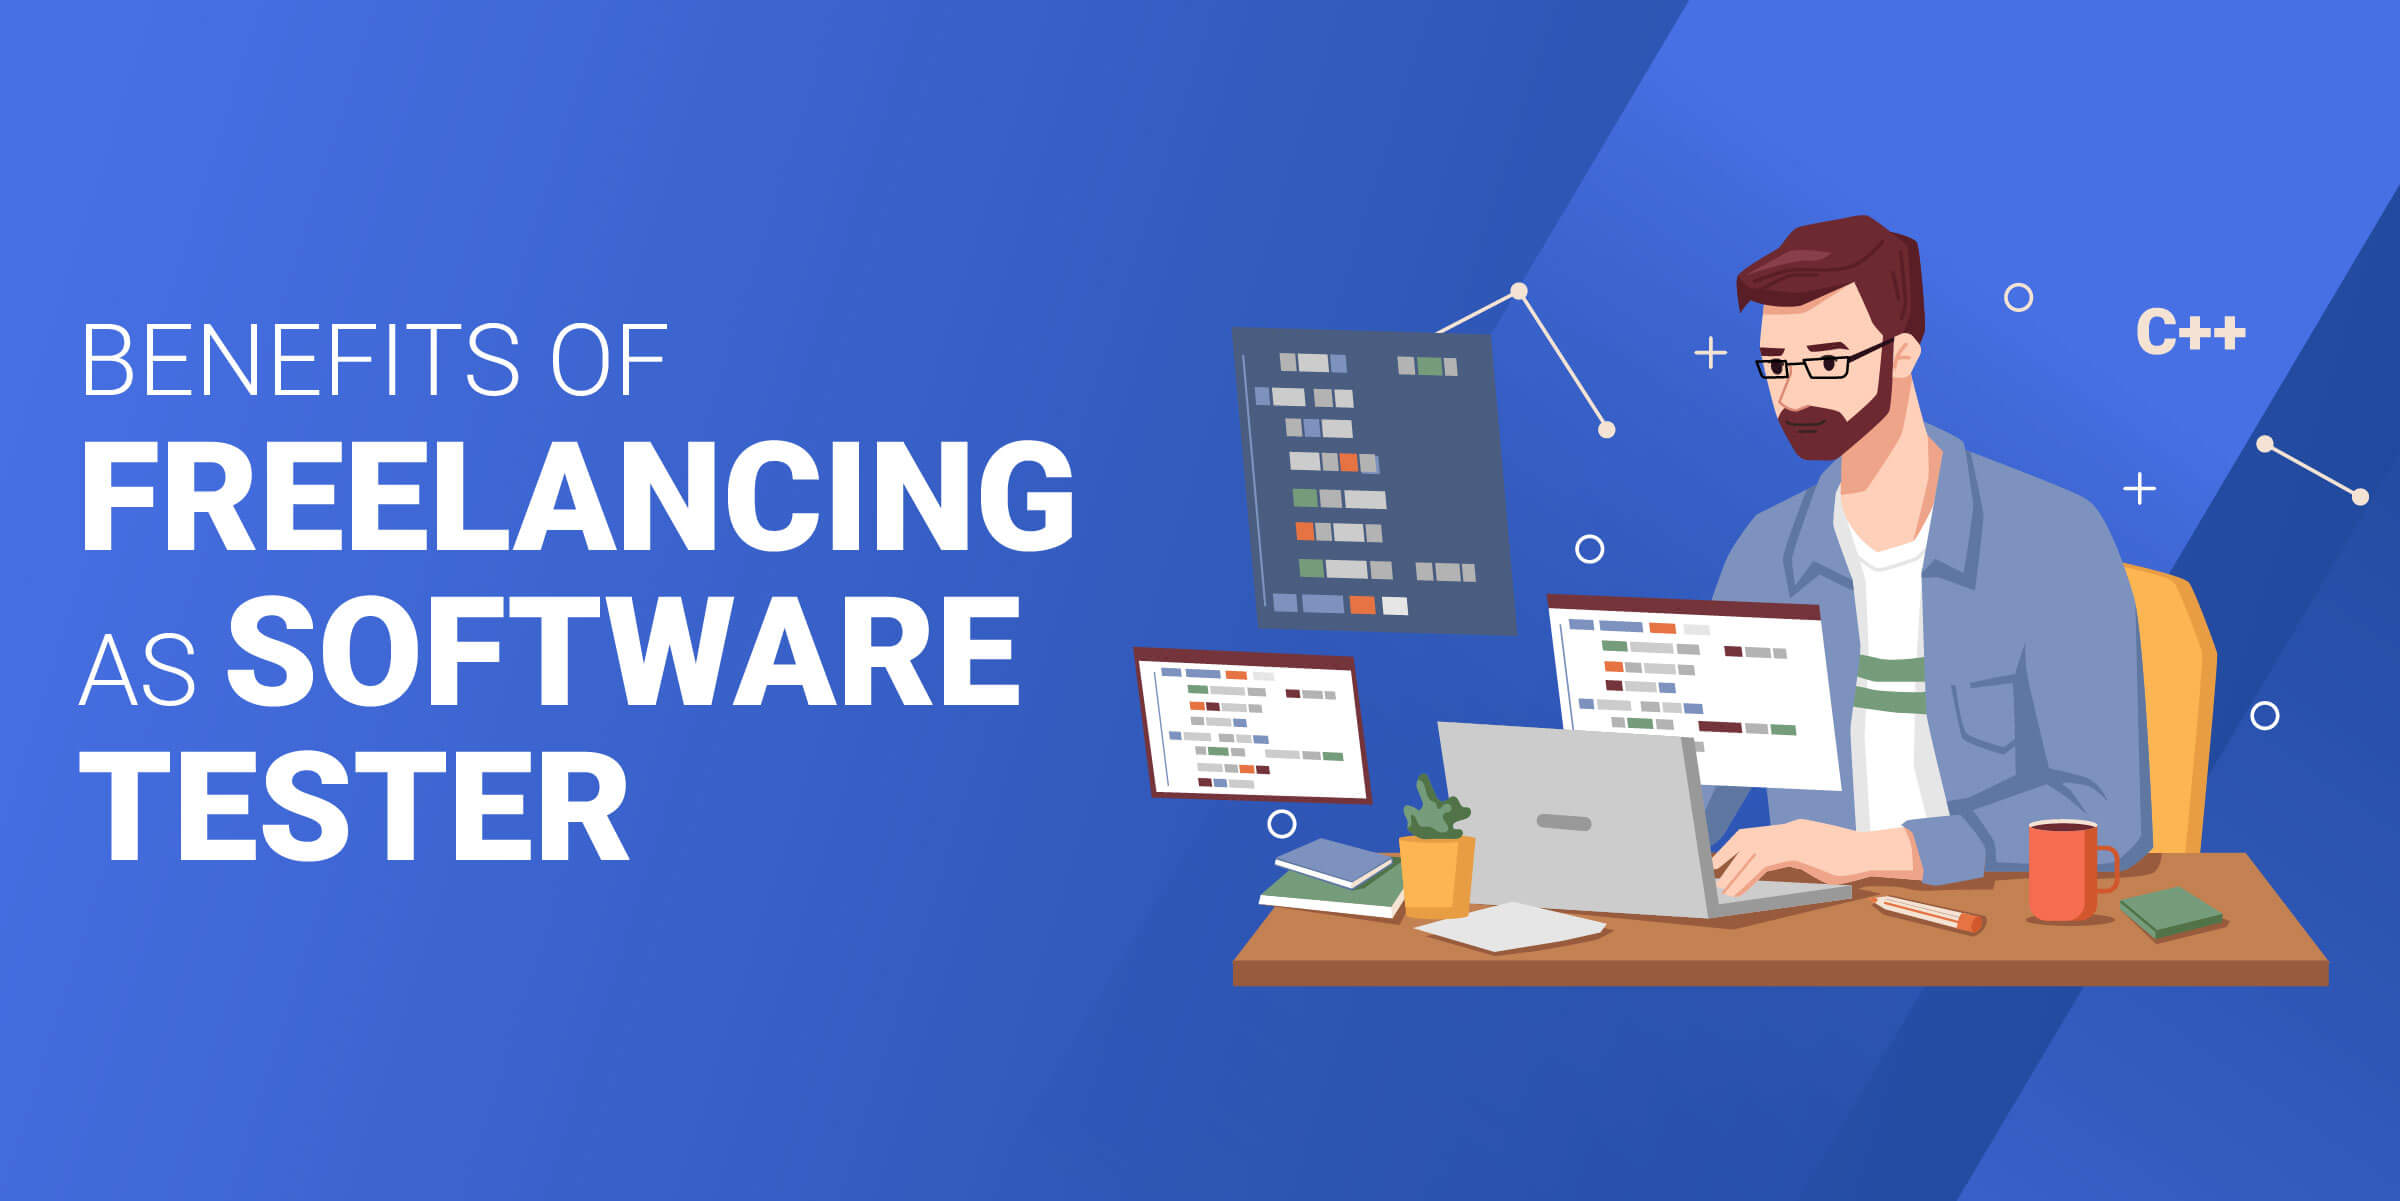 Benefits of Freelancing as Software Tester